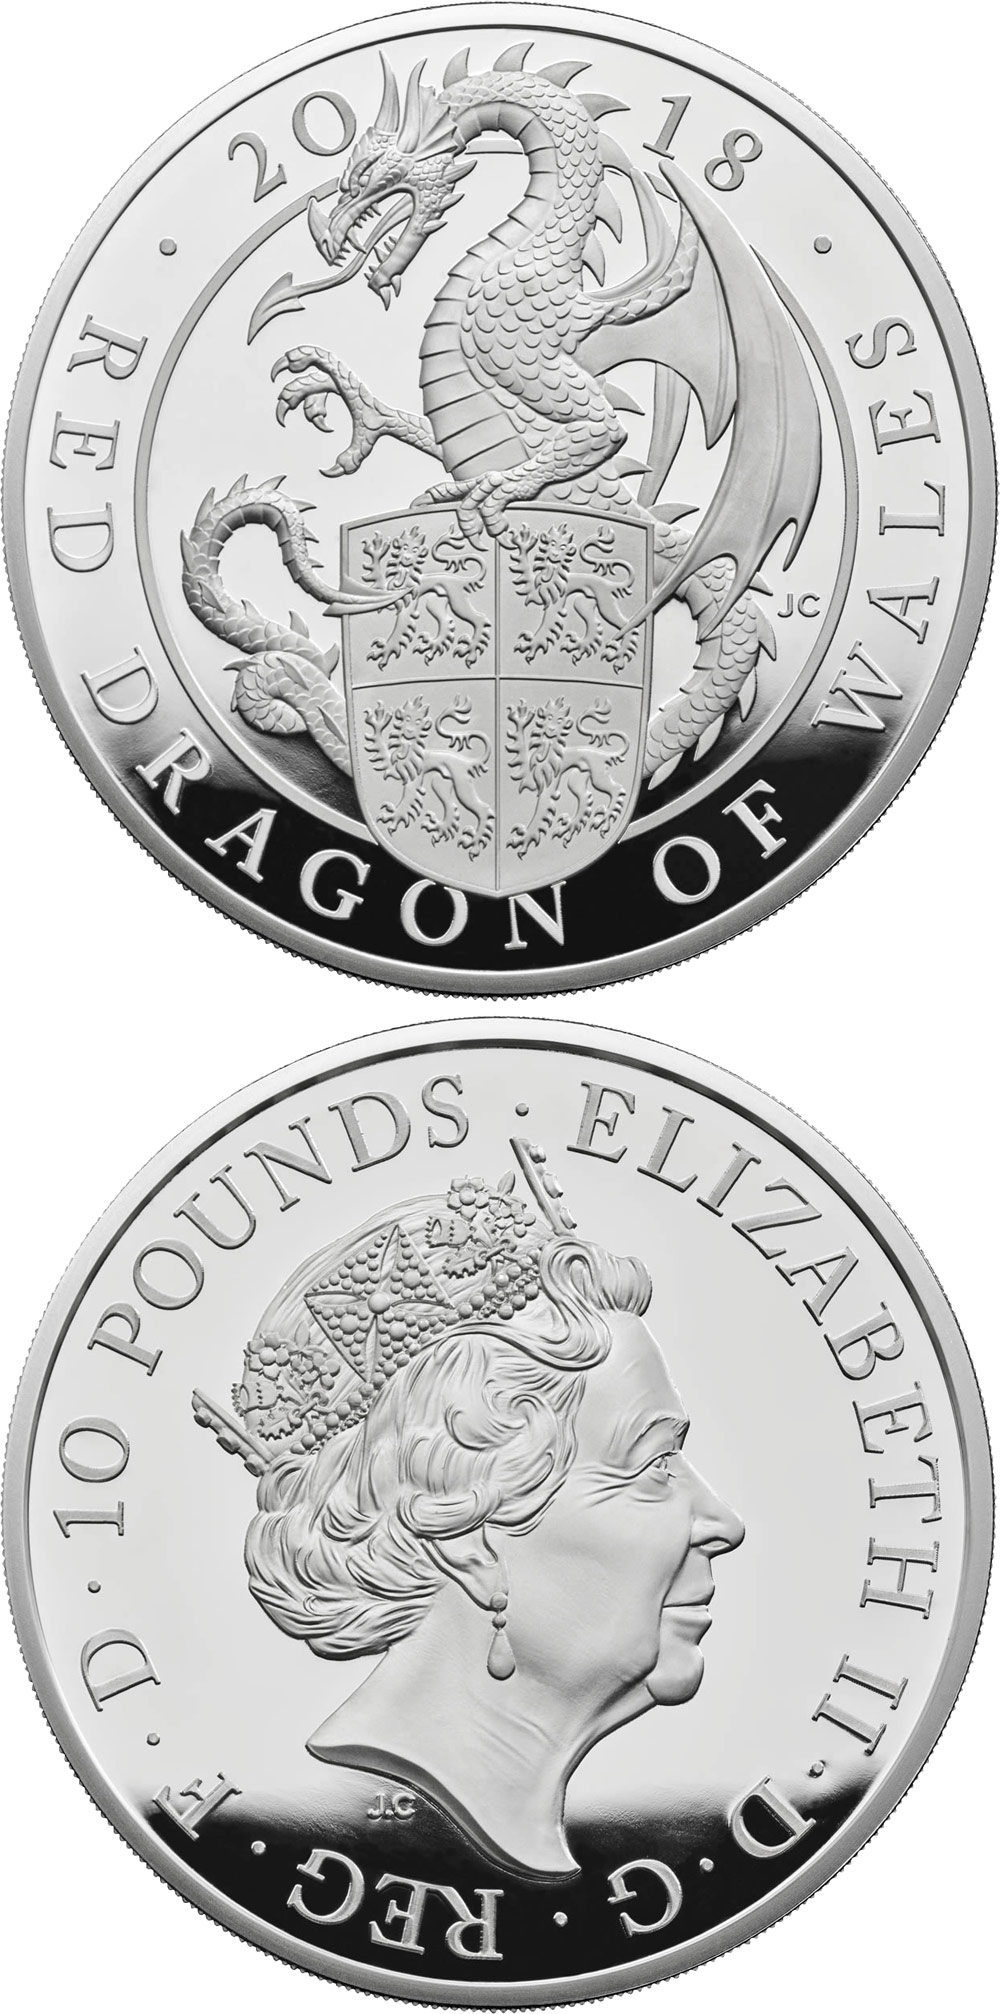 Image of 10 pounds coin - The Red Dragon of Wales | United Kingdom 2018.  The Silver coin is of Proof quality.